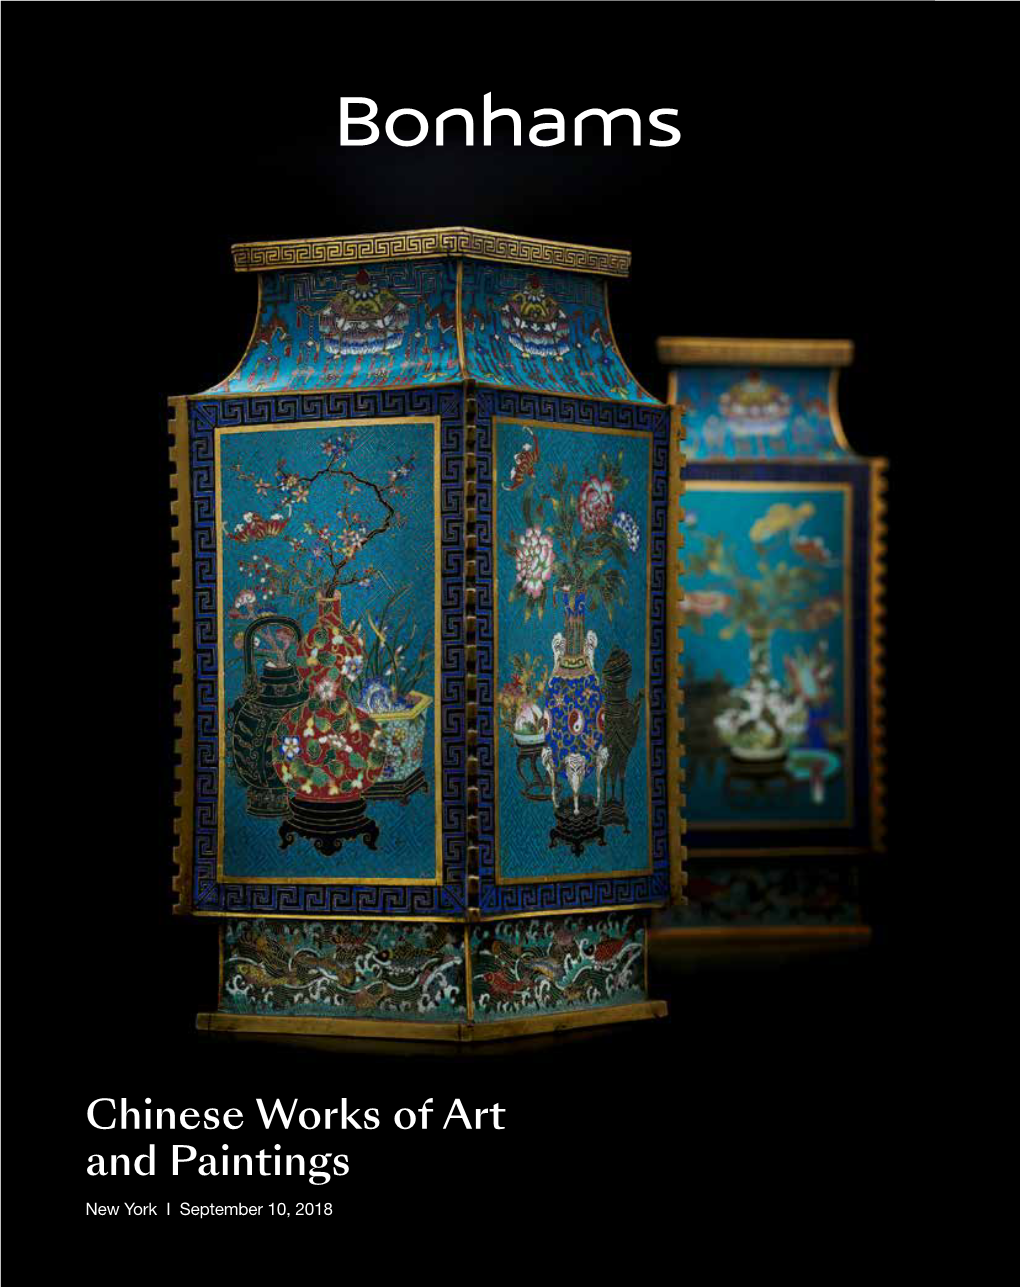 Chinese Works of Art and Paintings New York I September 10, 2018